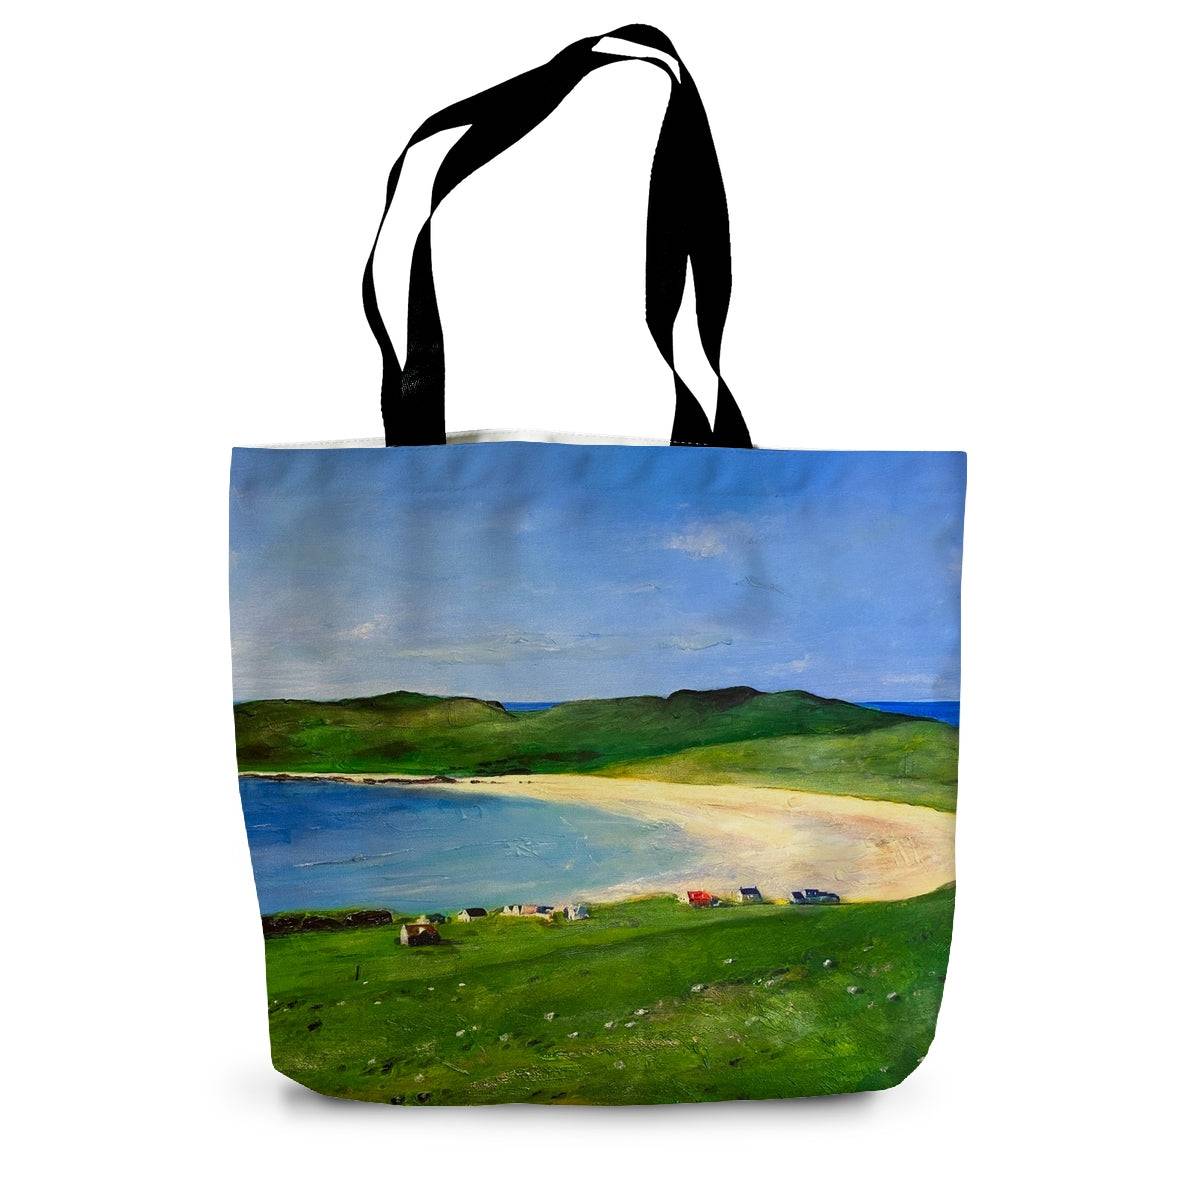 Balephuil Beach Tiree Art Gifts Canvas Tote Bag-Bags-Hebridean Islands Art Gallery-14"x18.5"-Paintings, Prints, Homeware, Art Gifts From Scotland By Scottish Artist Kevin Hunter